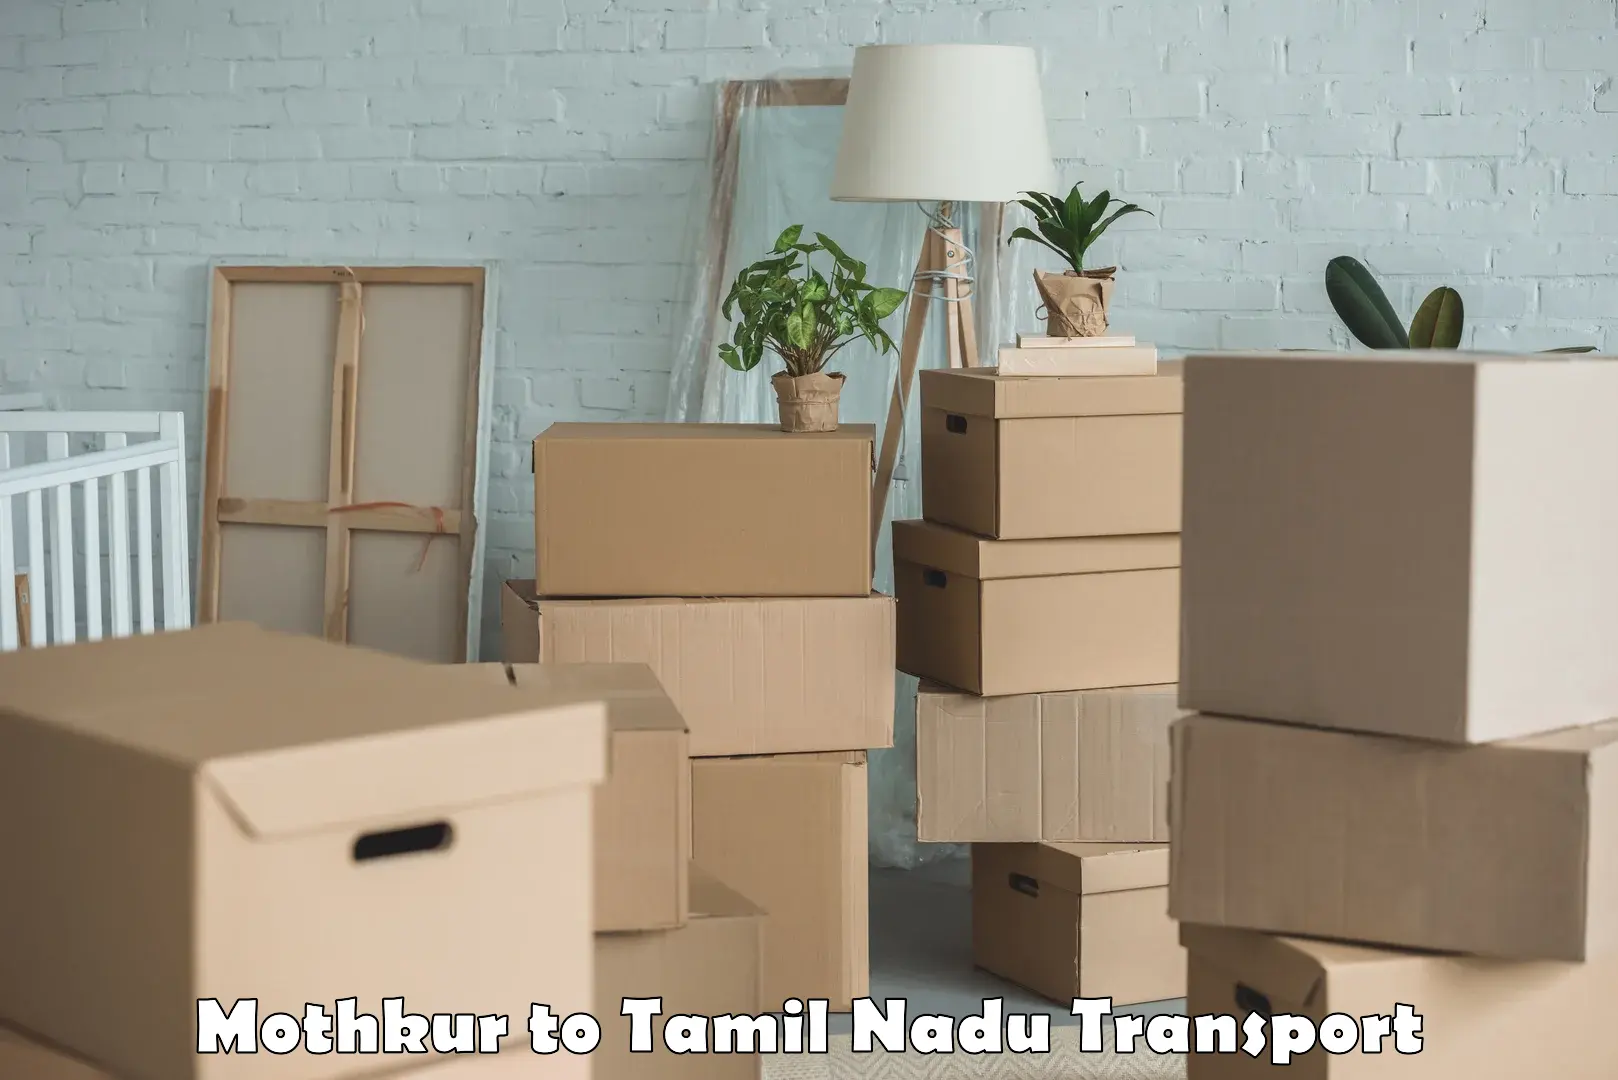 Domestic transport services Mothkur to Thisayanvilai